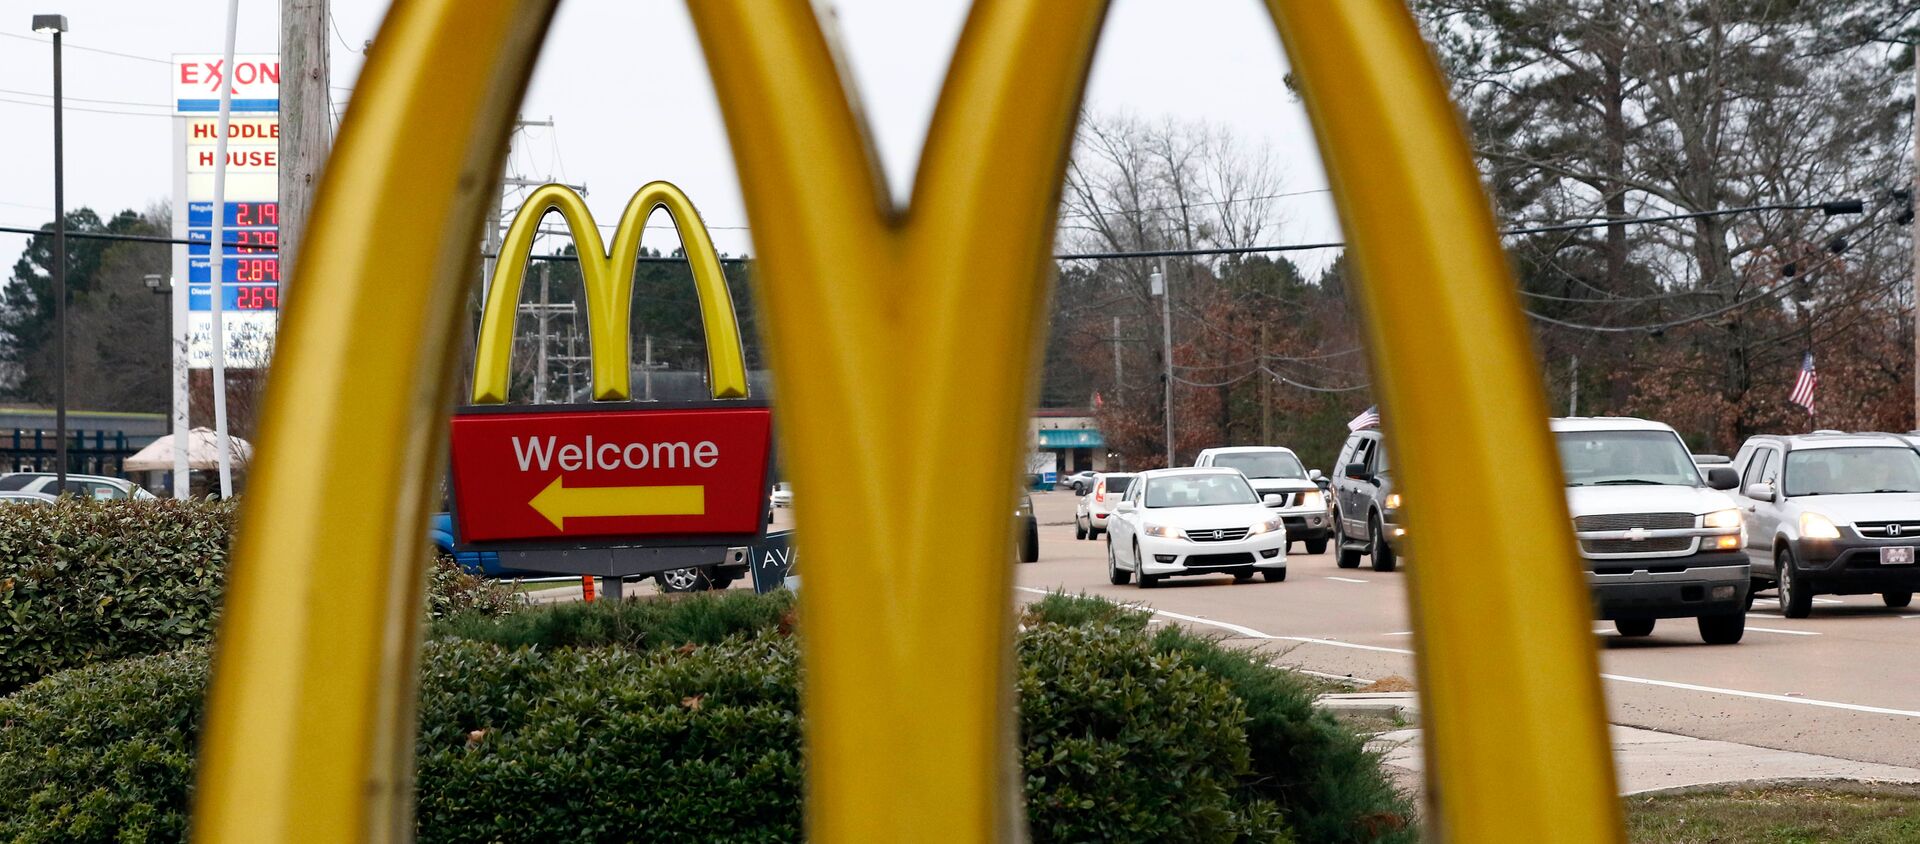 This Feb. 15, 2018, file photo shows a McDonald's Restaurant in Brandon, Miss. McDonald's Corp. reports earnings Monday, April 30. - 俄羅斯衛星通訊社, 1920, 08.05.2021